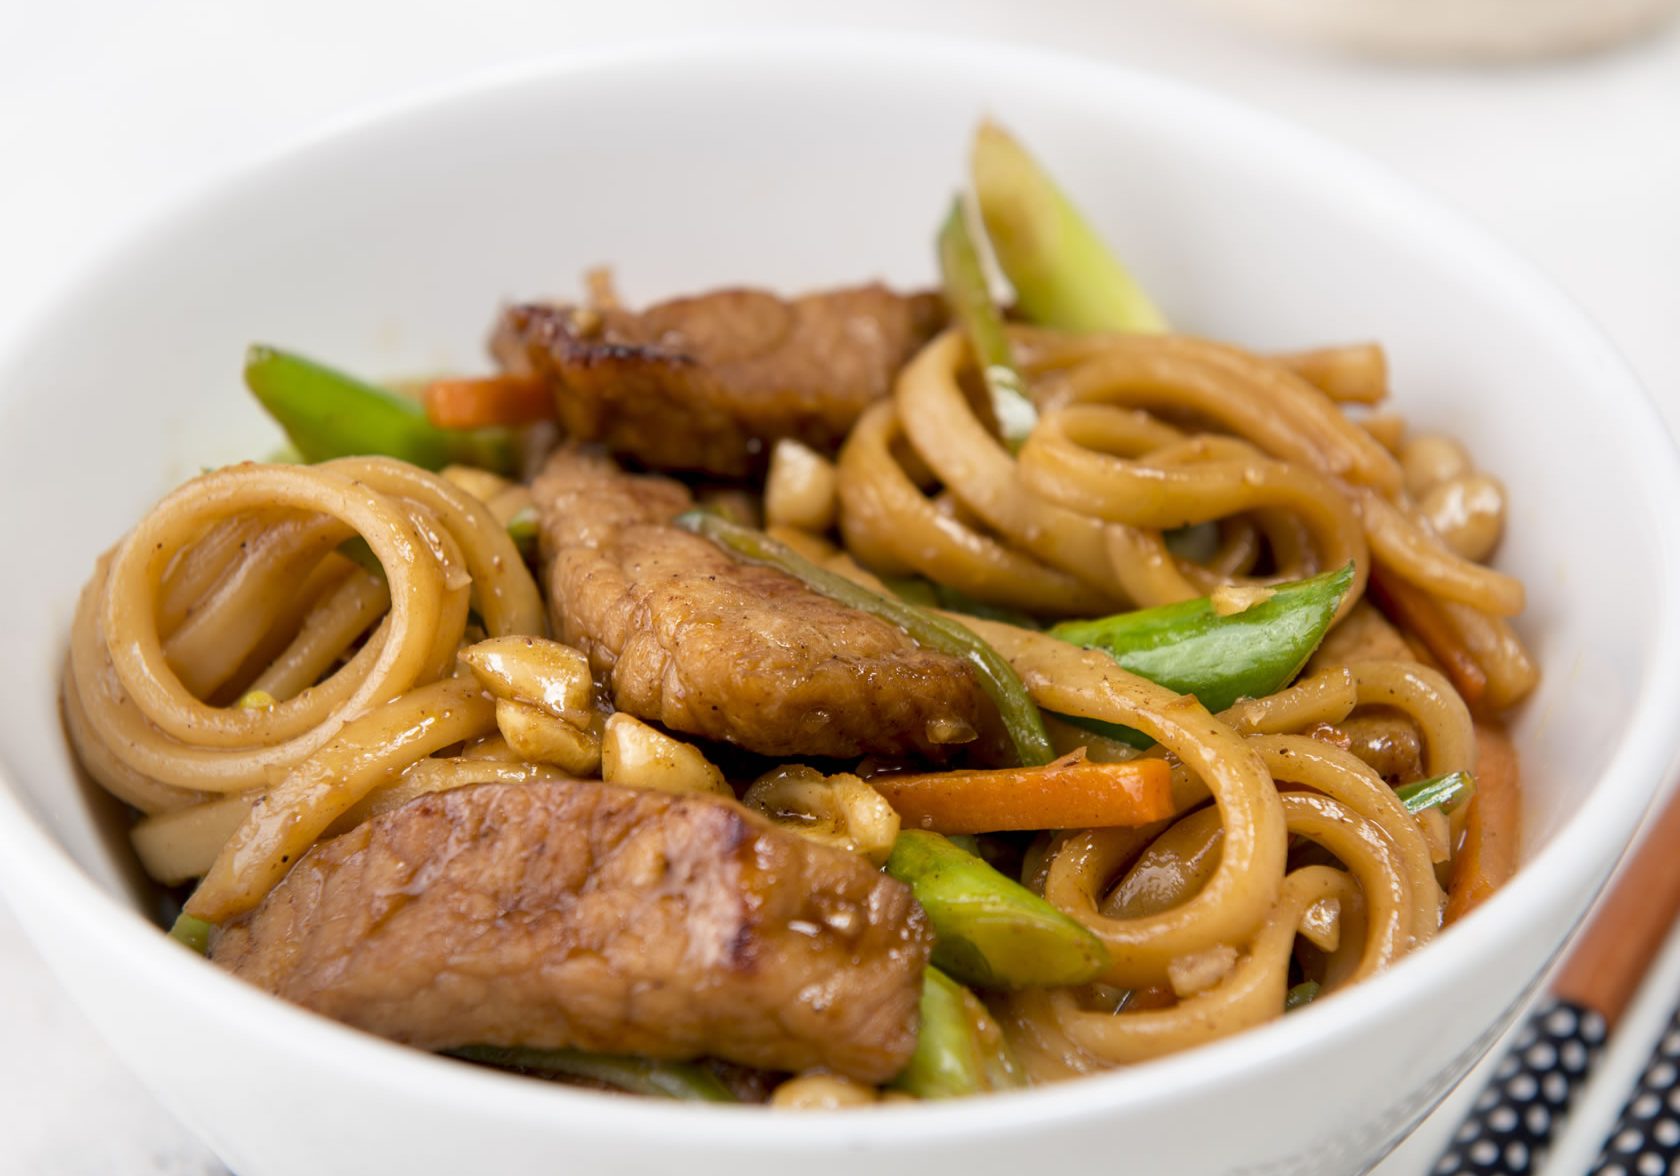 Stir-fried Pork with Soba Noodles and Sweet Soy Sauce